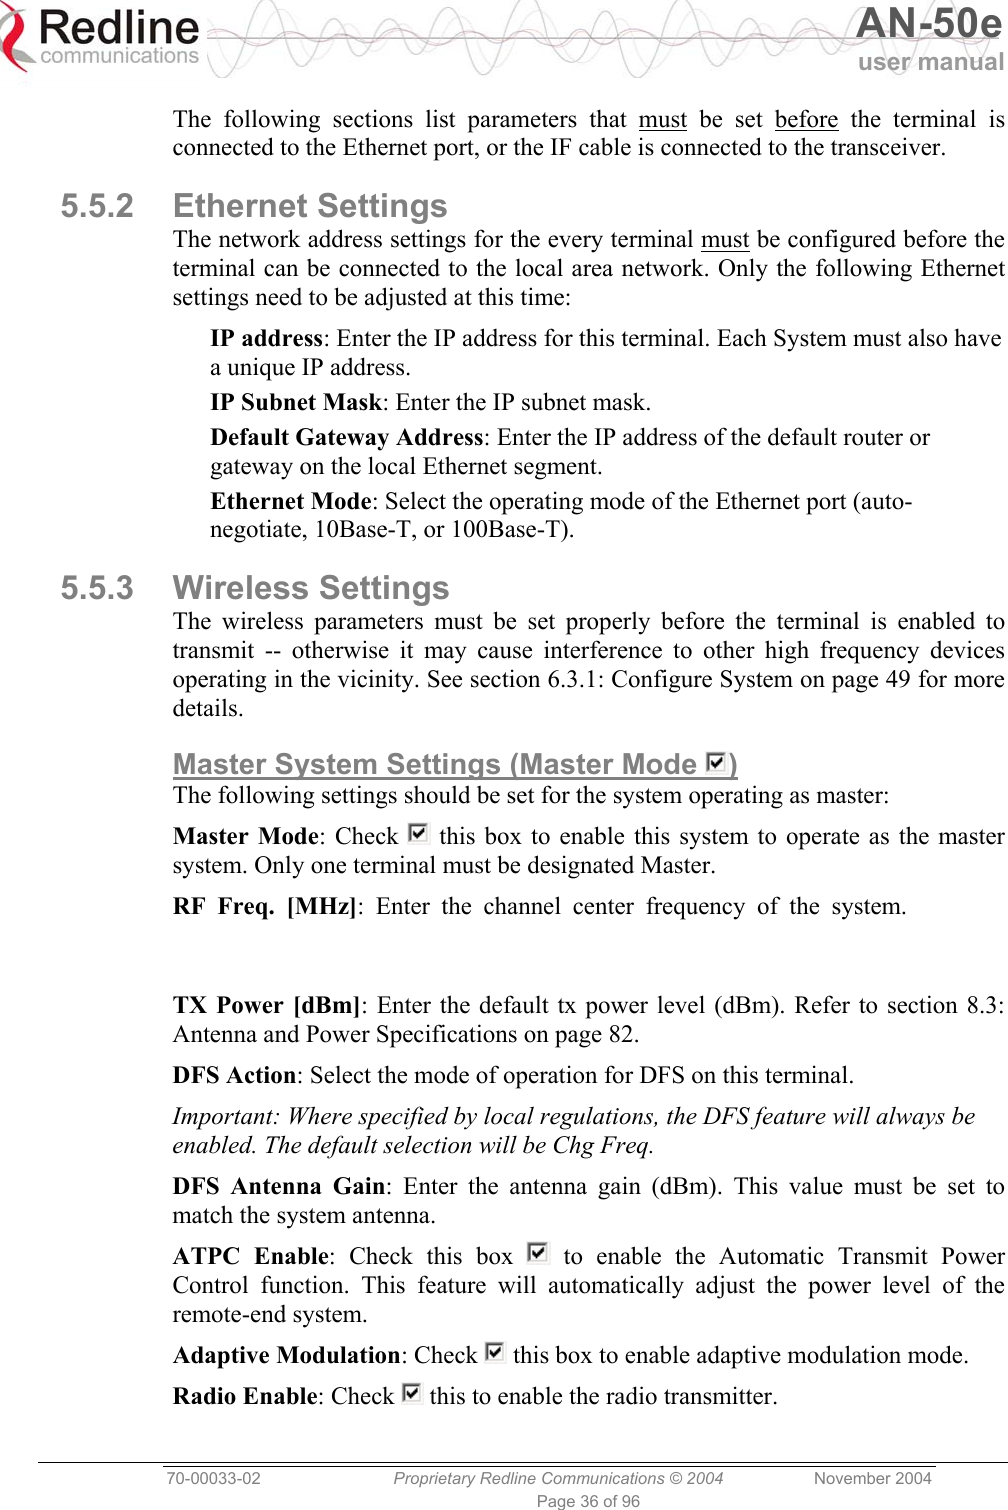   AN-50e user manual  70-00033-02  Proprietary Redline Communications © 2004 November 2004 Page 36 of 96 The following sections list parameters that must be set before the terminal is connected to the Ethernet port, or the IF cable is connected to the transceiver. 5.5.2 Ethernet Settings The network address settings for the every terminal must be configured before the terminal can be connected to the local area network. Only the following Ethernet settings need to be adjusted at this time: IP address: Enter the IP address for this terminal. Each System must also have a unique IP address. IP Subnet Mask: Enter the IP subnet mask. Default Gateway Address: Enter the IP address of the default router or gateway on the local Ethernet segment. Ethernet Mode: Select the operating mode of the Ethernet port (auto-negotiate, 10Base-T, or 100Base-T). 5.5.3 Wireless Settings The wireless parameters must be set properly before the terminal is enabled to transmit -- otherwise it may cause interference to other high frequency devices operating in the vicinity. See section 6.3.1: Configure System on page 49 for more details. Master System Settings (Master Mode  ) The following settings should be set for the system operating as master: Master Mode: Check   this box to enable this system to operate as the master system. Only one terminal must be designated Master. RF Freq. [MHz]: Enter the channel center frequency of the system. TX Power [dBm]: Enter the default tx power level (dBm). Refer to section 8.3: Antenna and Power Specifications on page 82. DFS Action: Select the mode of operation for DFS on this terminal. Important: Where specified by local regulations, the DFS feature will always be enabled. The default selection will be Chg Freq. DFS Antenna Gain: Enter the antenna gain (dBm). This value must be set to match the system antenna. ATPC Enable: Check this box   to enable the Automatic Transmit Power Control function. This feature will automatically adjust the power level of the remote-end system. Adaptive Modulation: Check   this box to enable adaptive modulation mode. Radio Enable: Check   this to enable the radio transmitter. 